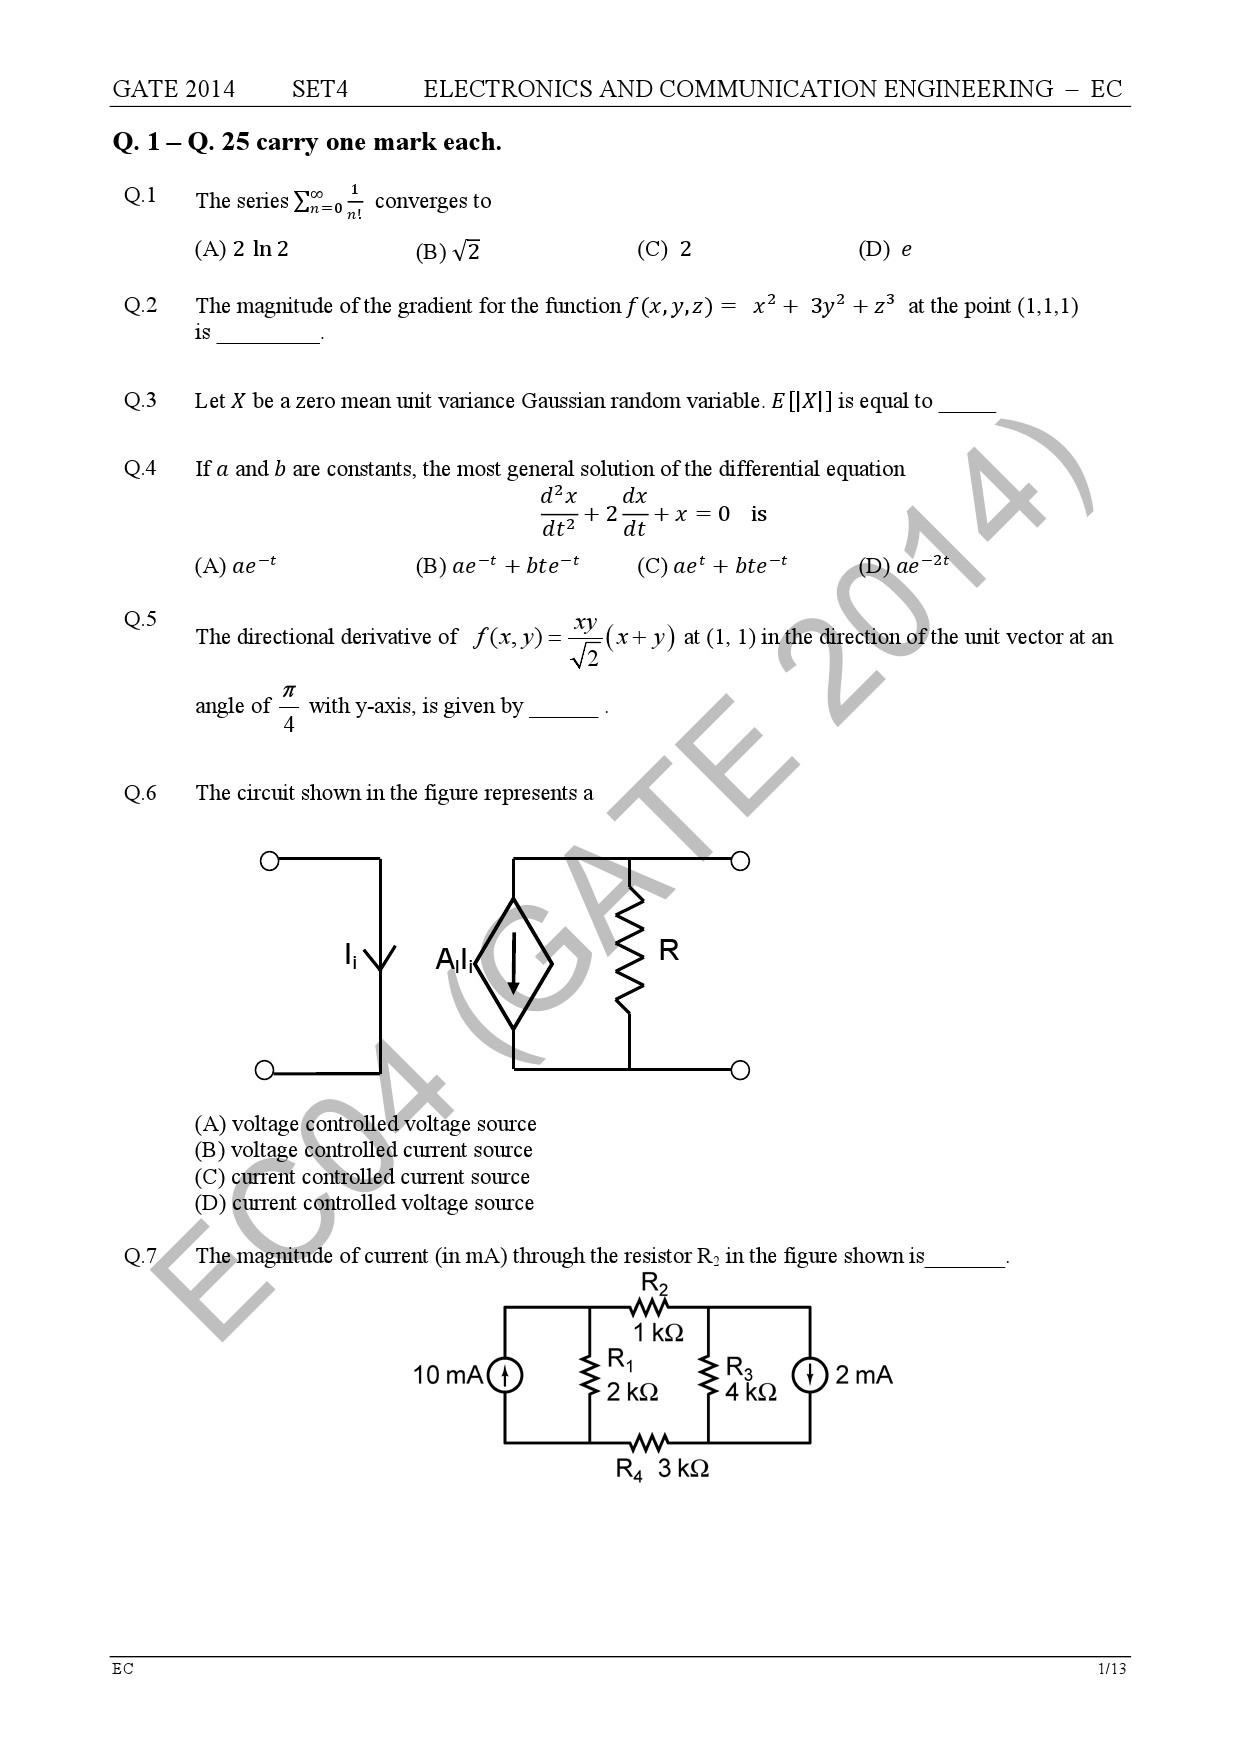 GATE Exam Question Paper 2014 Electronics and Communication Engineering Set 4 7